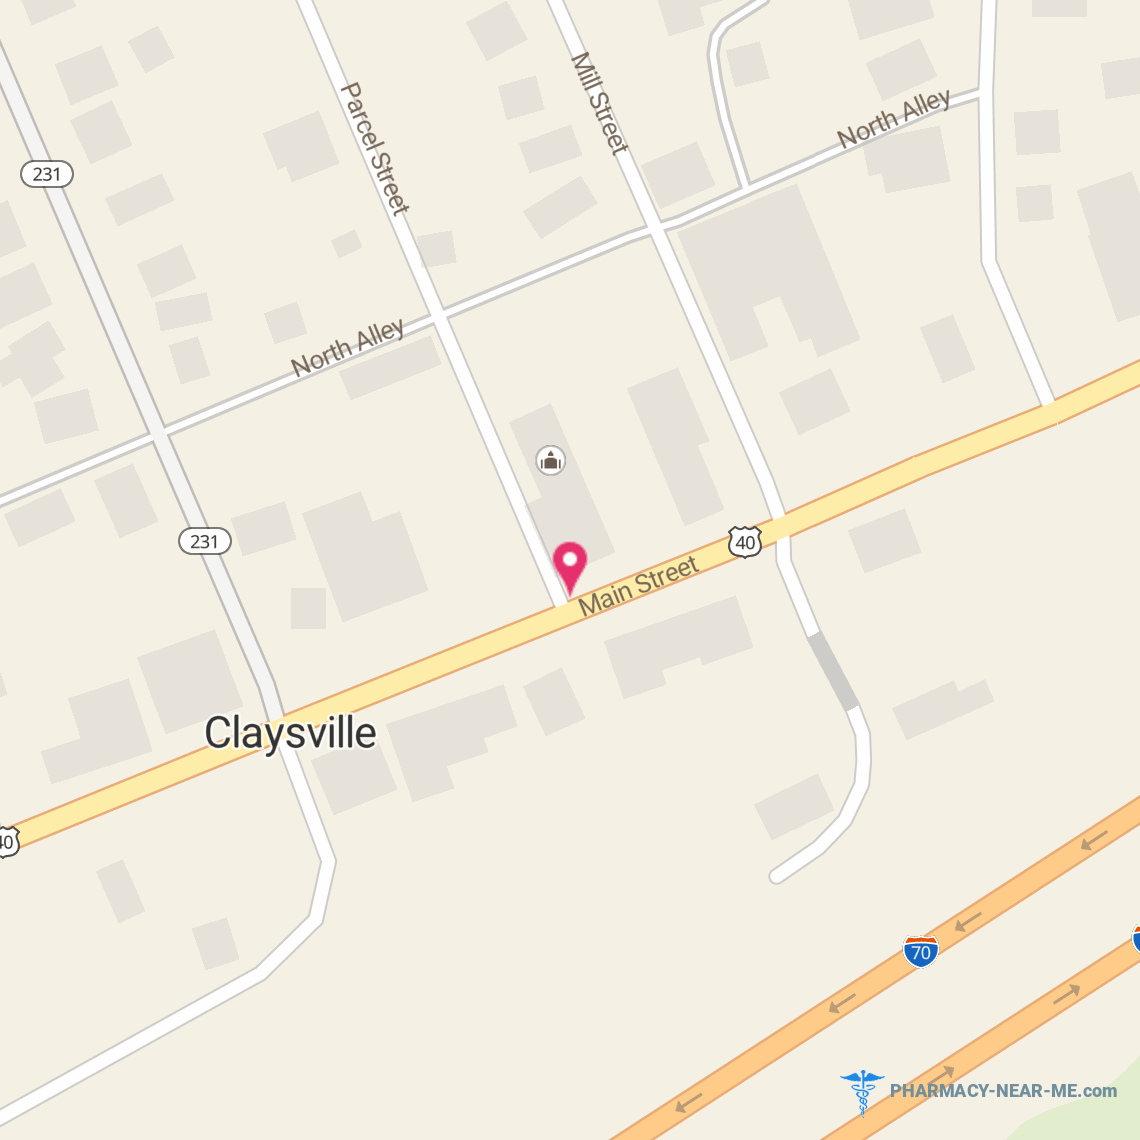 CLAYSVILLE PHARMACY, LLC - Pharmacy Hours, Phone, Reviews & Information: 305 Main St, Claysville, PA 15323